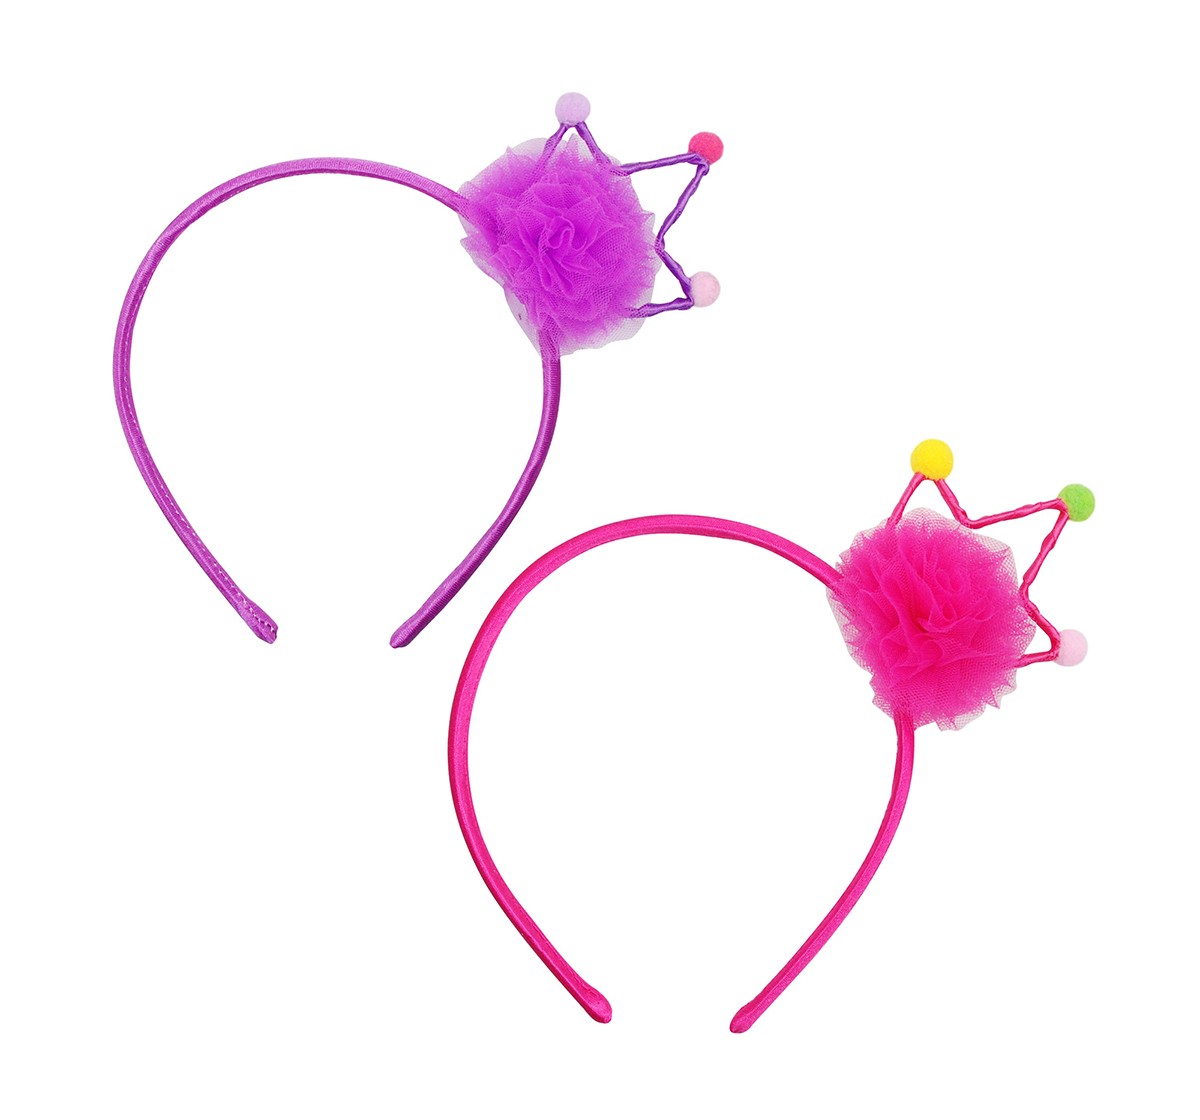 Luvley Party Pom Pom Crown Headband Assorted Accessories age 3Y+ 